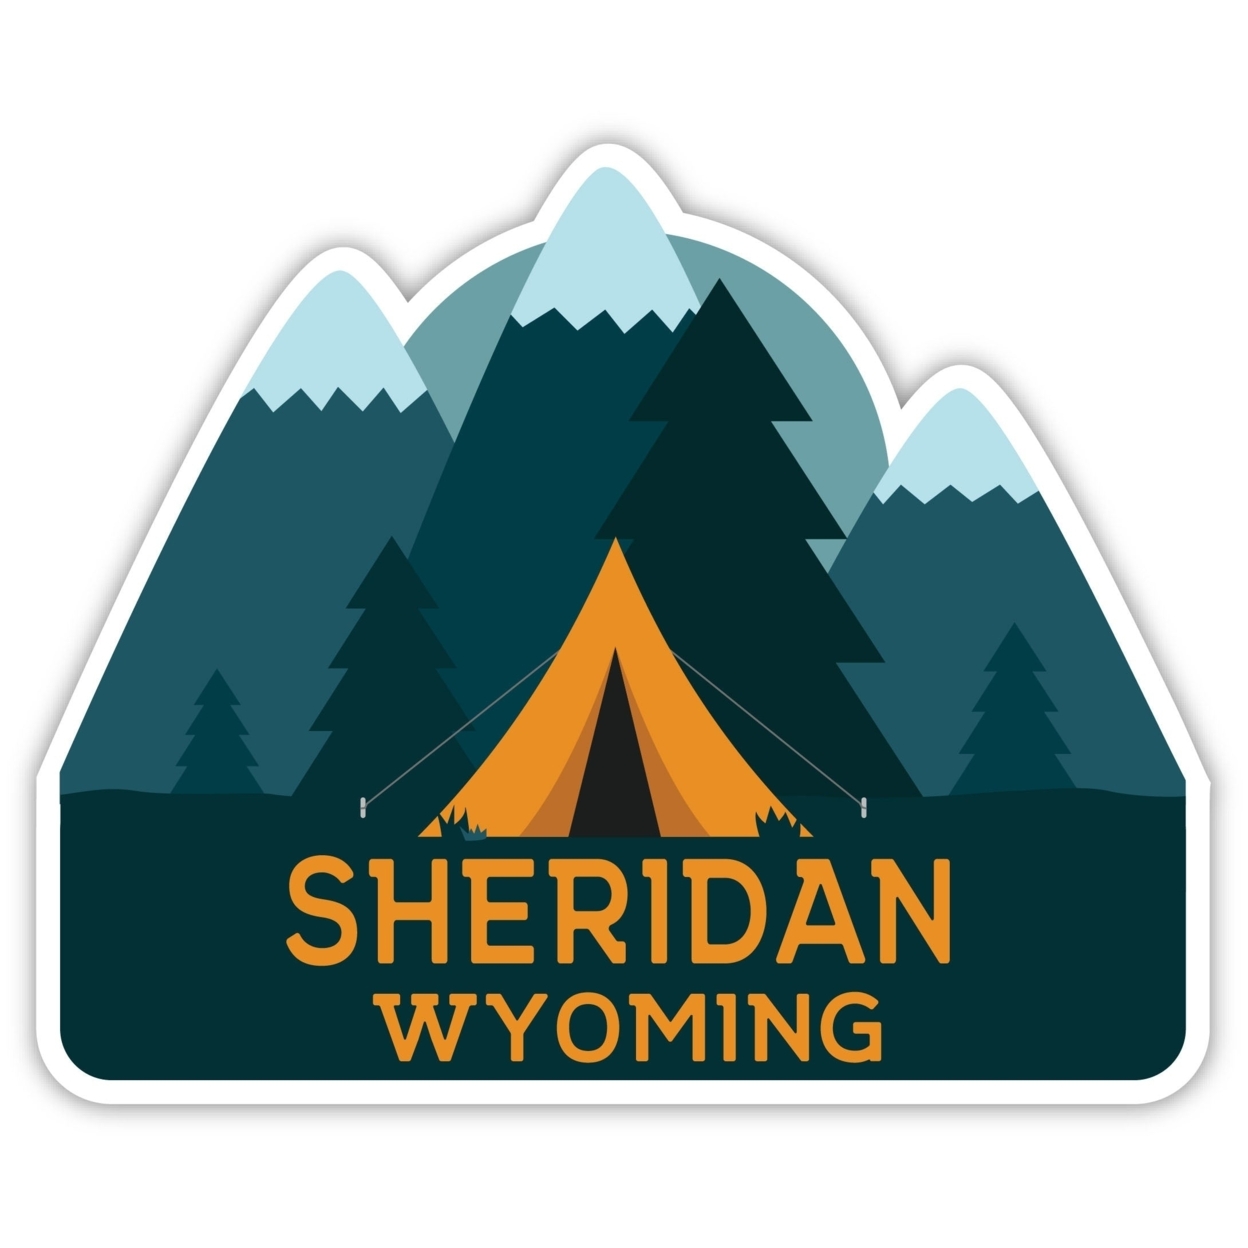 Sheridan Wyoming Souvenir Decorative Stickers (Choose Theme And Size) - Single Unit, 4-Inch, Tent